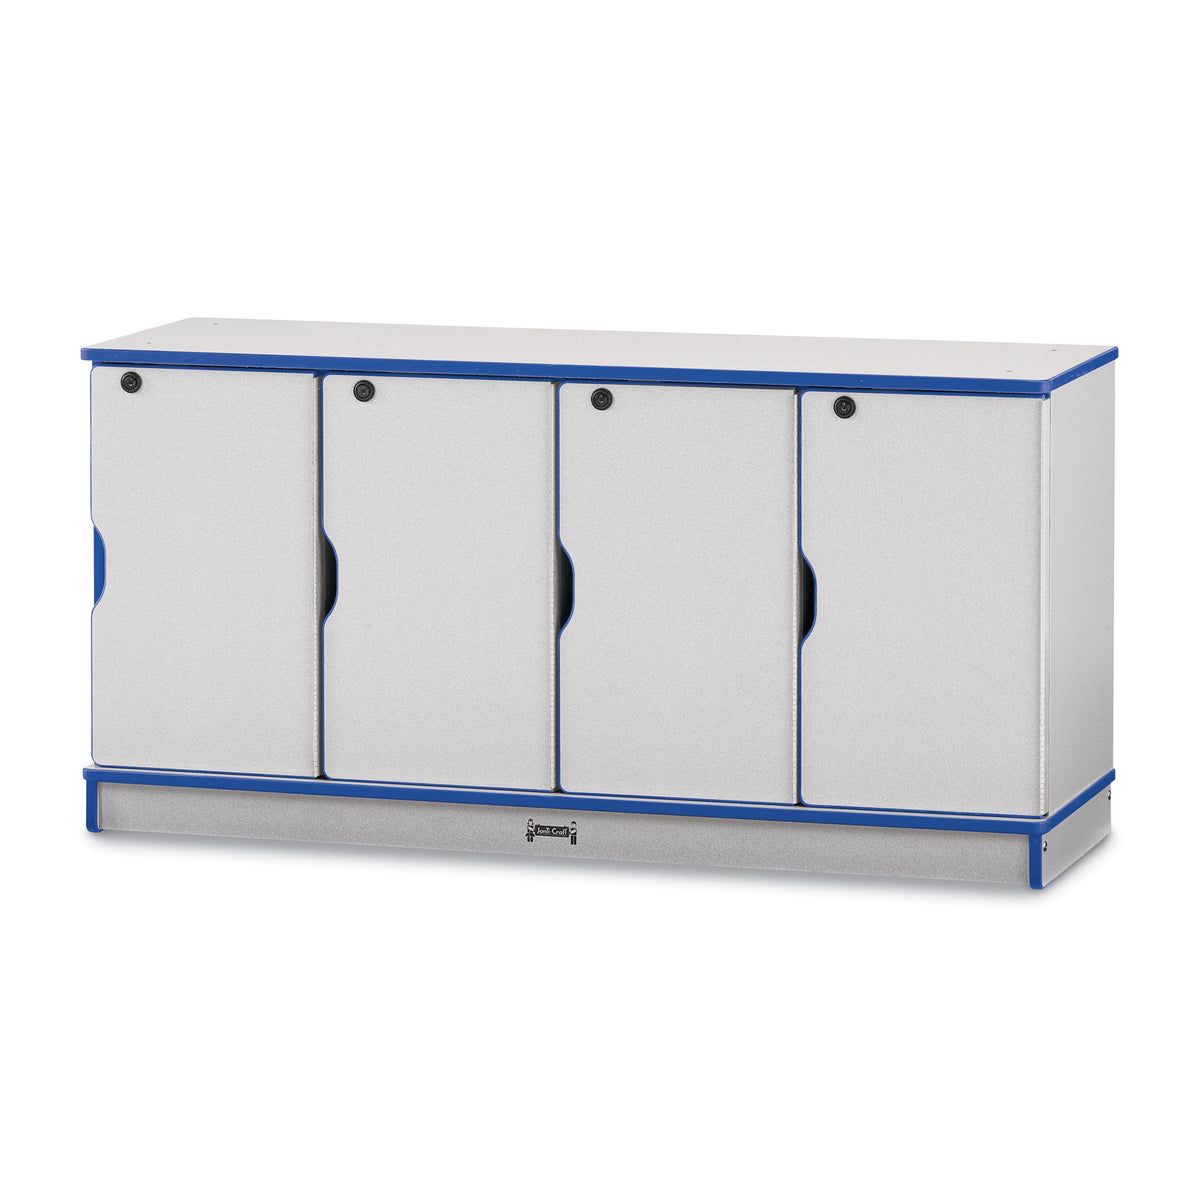 4688JC003, Rainbow Accents Stacking Lockable Lockers -  Single Stack - Blue